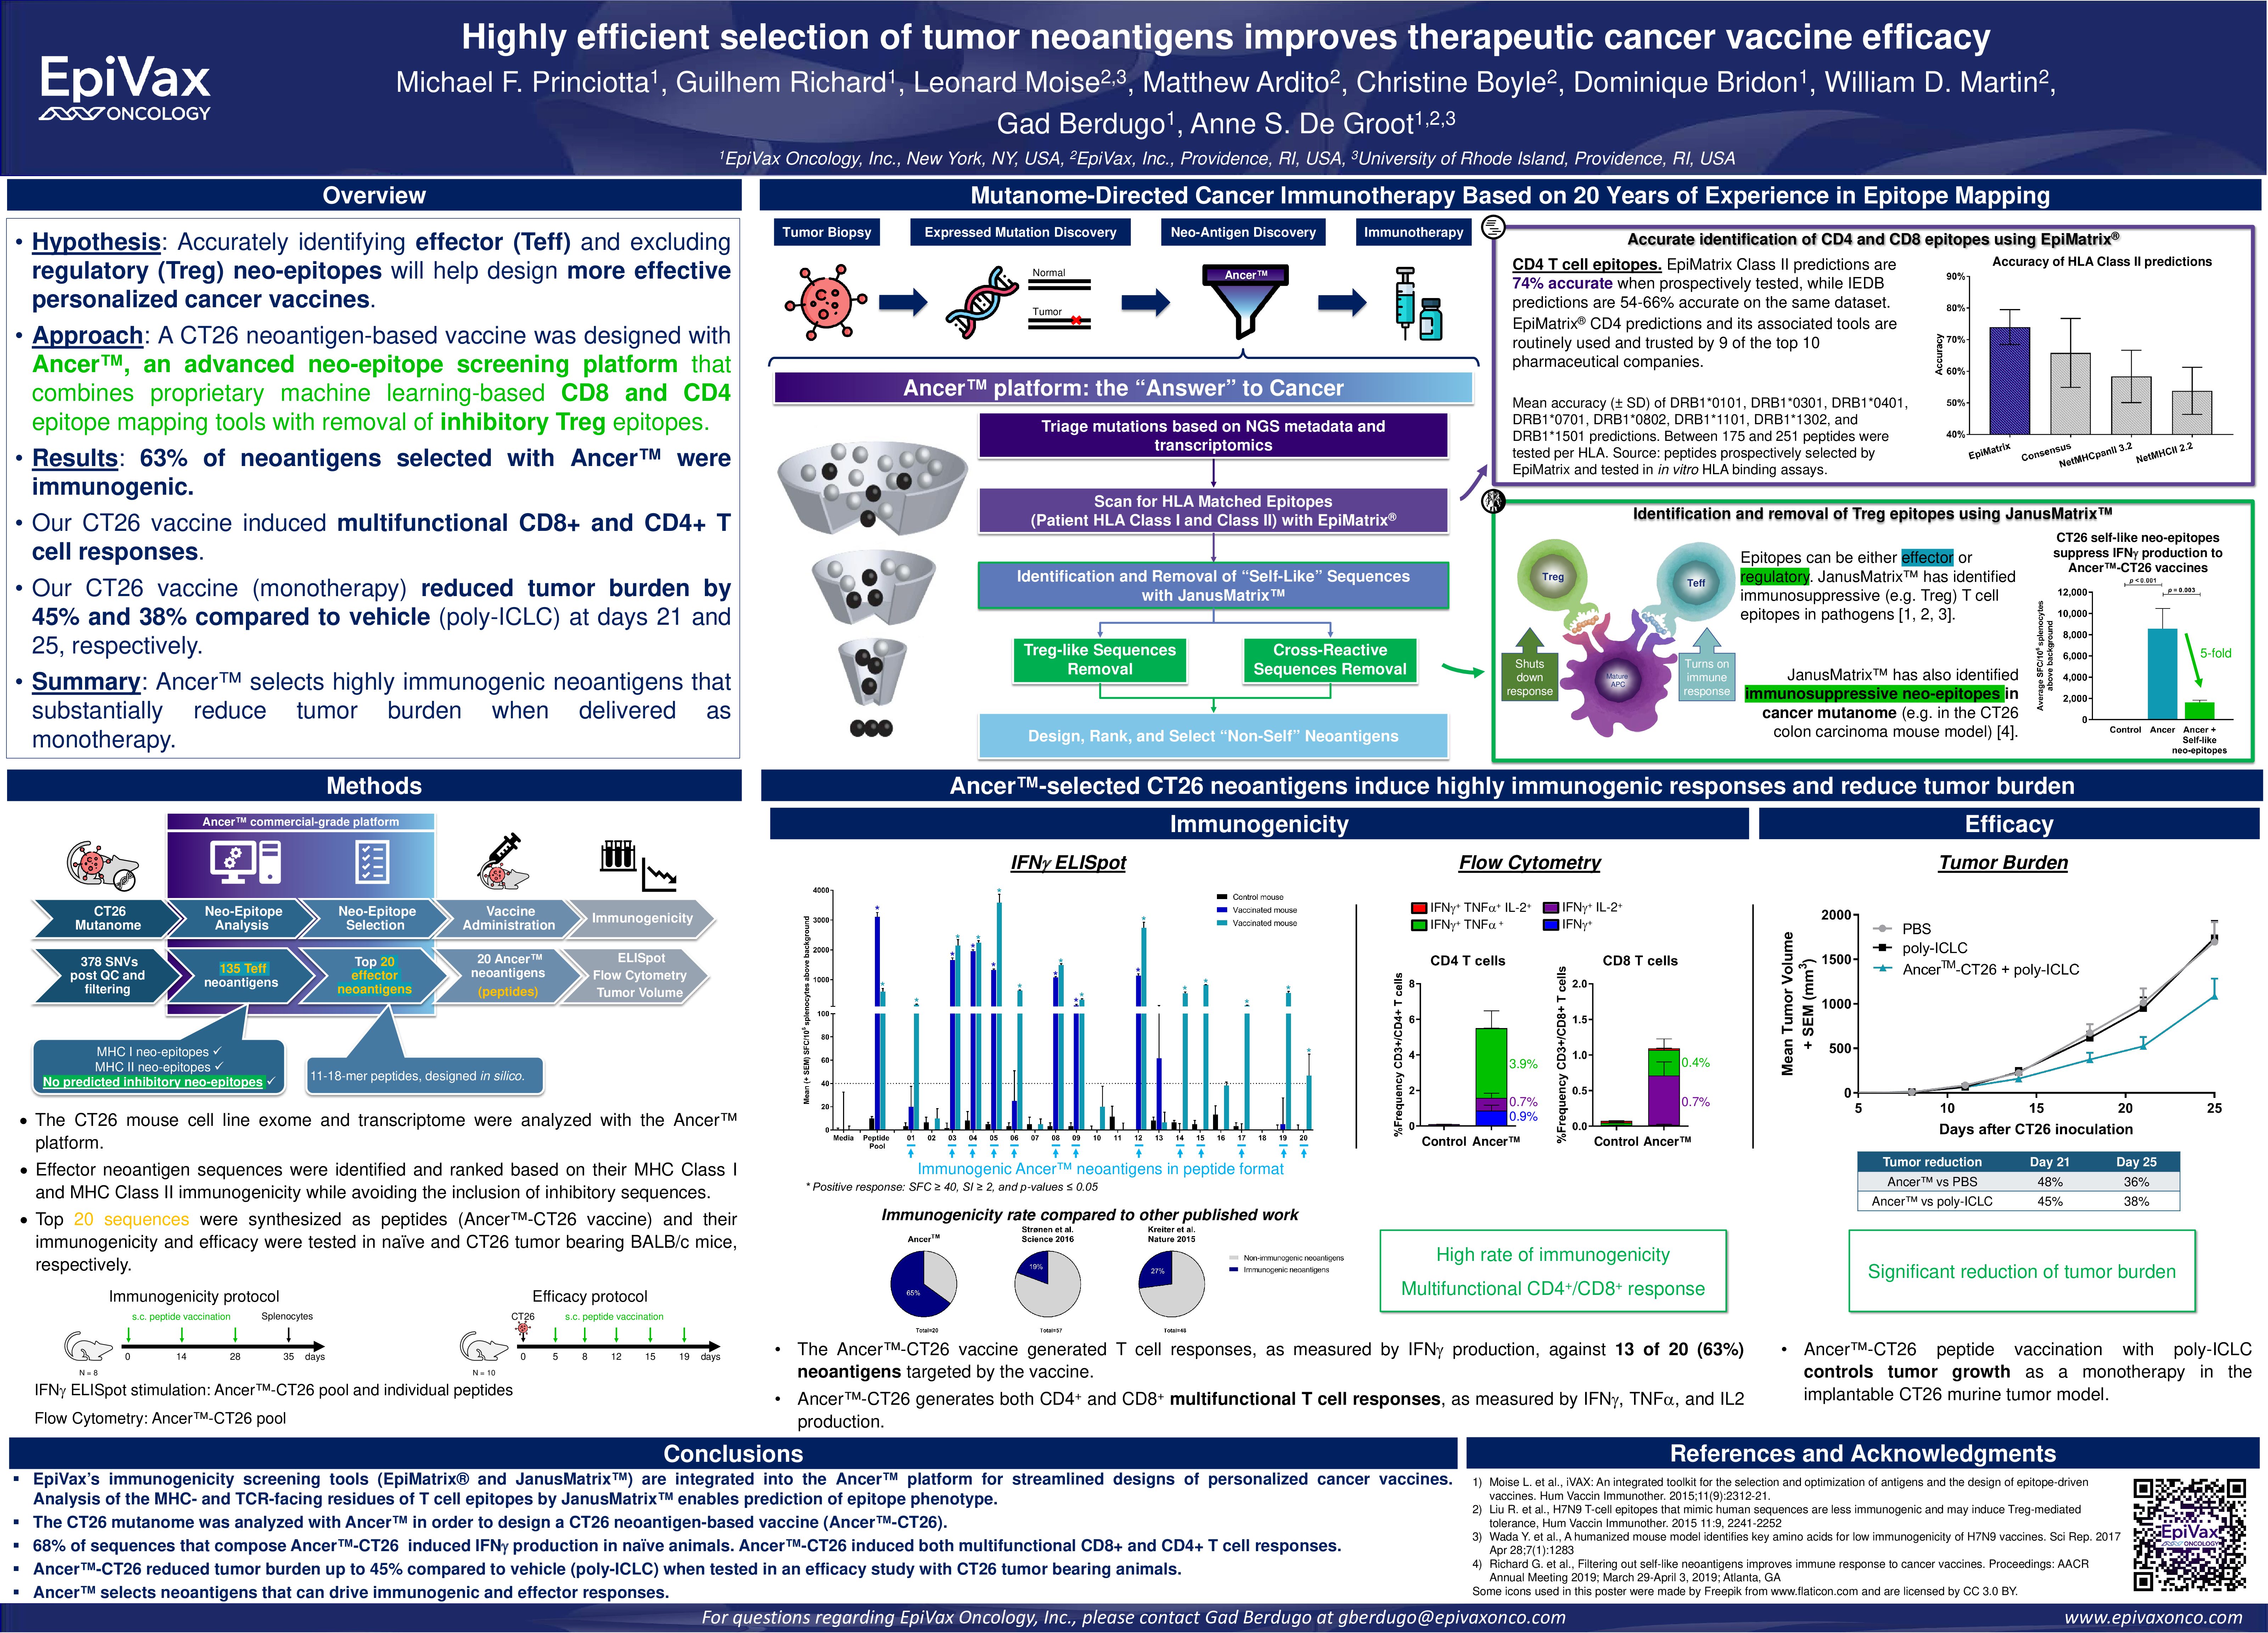 Highly efficient selection of tumor neoantigens improves therapeutic cancer vaccine efficacy